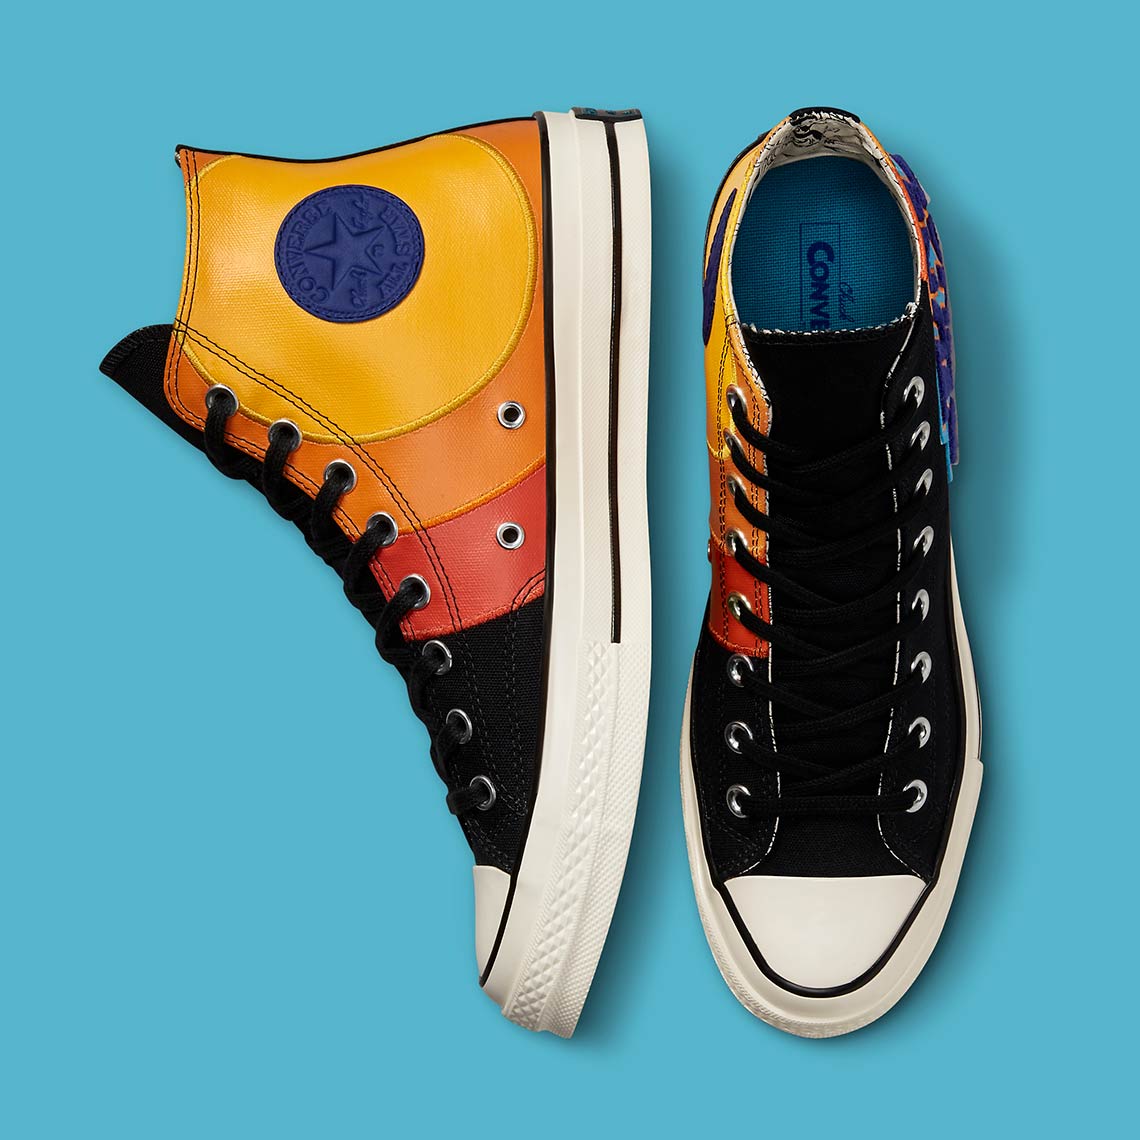 Space Jam A New Legacy Converse Chuck Taylor Release Date | SneakerNews.com